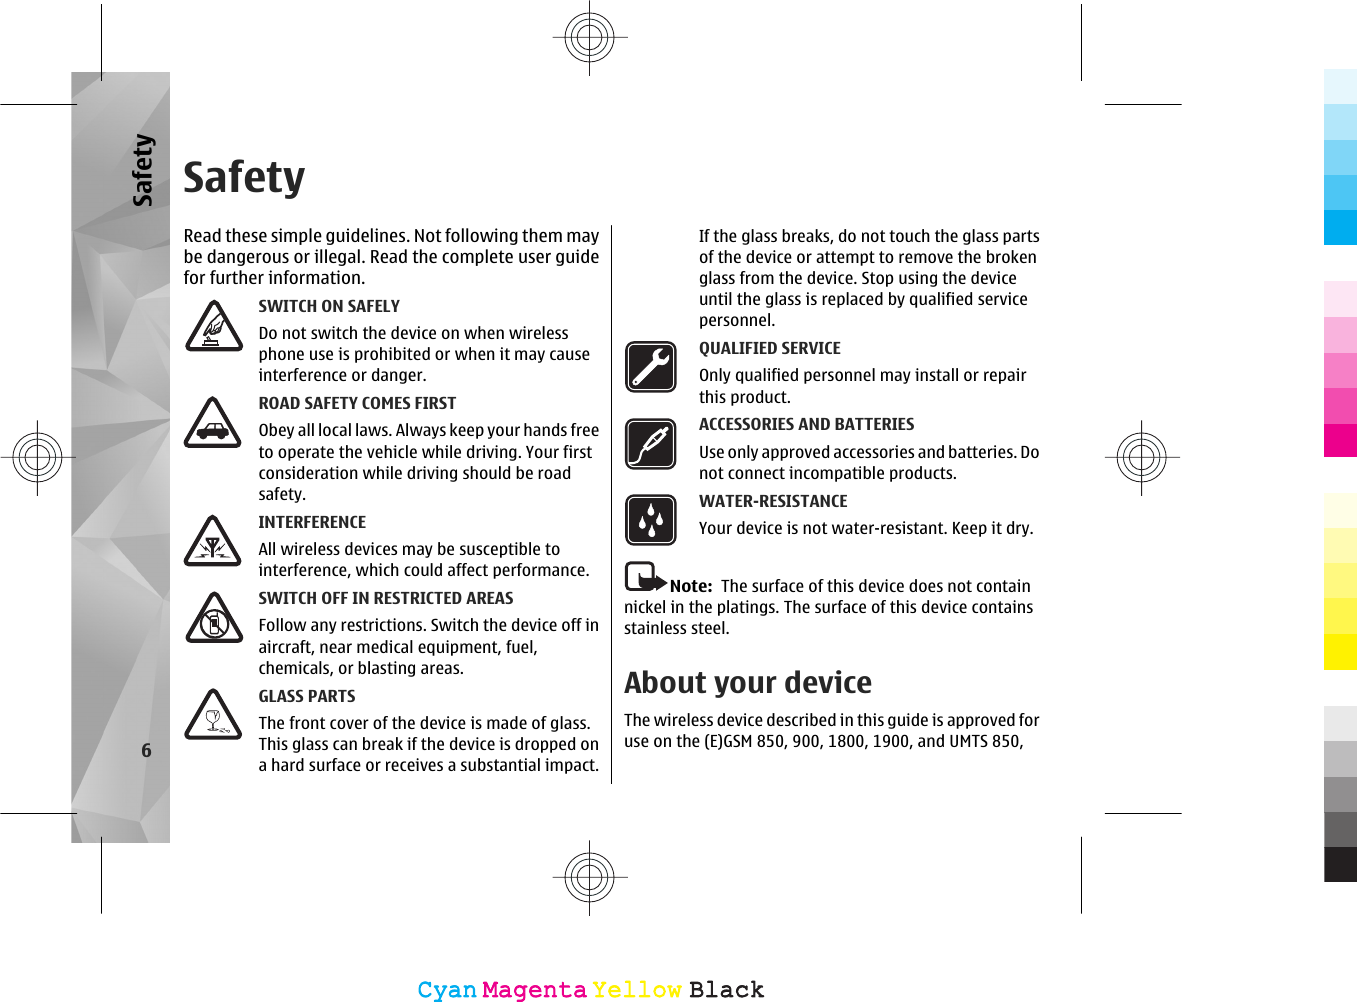 SafetyRead these simple guidelines. Not following them maybe dangerous or illegal. Read the complete user guidefor further information.SWITCH ON SAFELYDo not switch the device on when wirelessphone use is prohibited or when it may causeinterference or danger.ROAD SAFETY COMES FIRSTObey all local laws. Always keep your hands freeto operate the vehicle while driving. Your firstconsideration while driving should be roadsafety.INTERFERENCEAll wireless devices may be susceptible tointerference, which could affect performance.SWITCH OFF IN RESTRICTED AREASFollow any restrictions. Switch the device off inaircraft, near medical equipment, fuel,chemicals, or blasting areas.GLASS PARTSThe front cover of the device is made of glass.This glass can break if the device is dropped ona hard surface or receives a substantial impact.If the glass breaks, do not touch the glass partsof the device or attempt to remove the brokenglass from the device. Stop using the deviceuntil the glass is replaced by qualified servicepersonnel.QUALIFIED SERVICEOnly qualified personnel may install or repairthis product.ACCESSORIES AND BATTERIESUse only approved accessories and batteries. Donot connect incompatible products.WATER-RESISTANCEYour device is not water-resistant. Keep it dry.Note:  The surface of this device does not containnickel in the platings. The surface of this device containsstainless steel.About your deviceThe wireless device described in this guide is approved foruse on the (E)GSM 850, 900, 1800, 1900, and UMTS 850,6SafetyCyanCyanMagentaMagentaYellowYellowBlackBlack